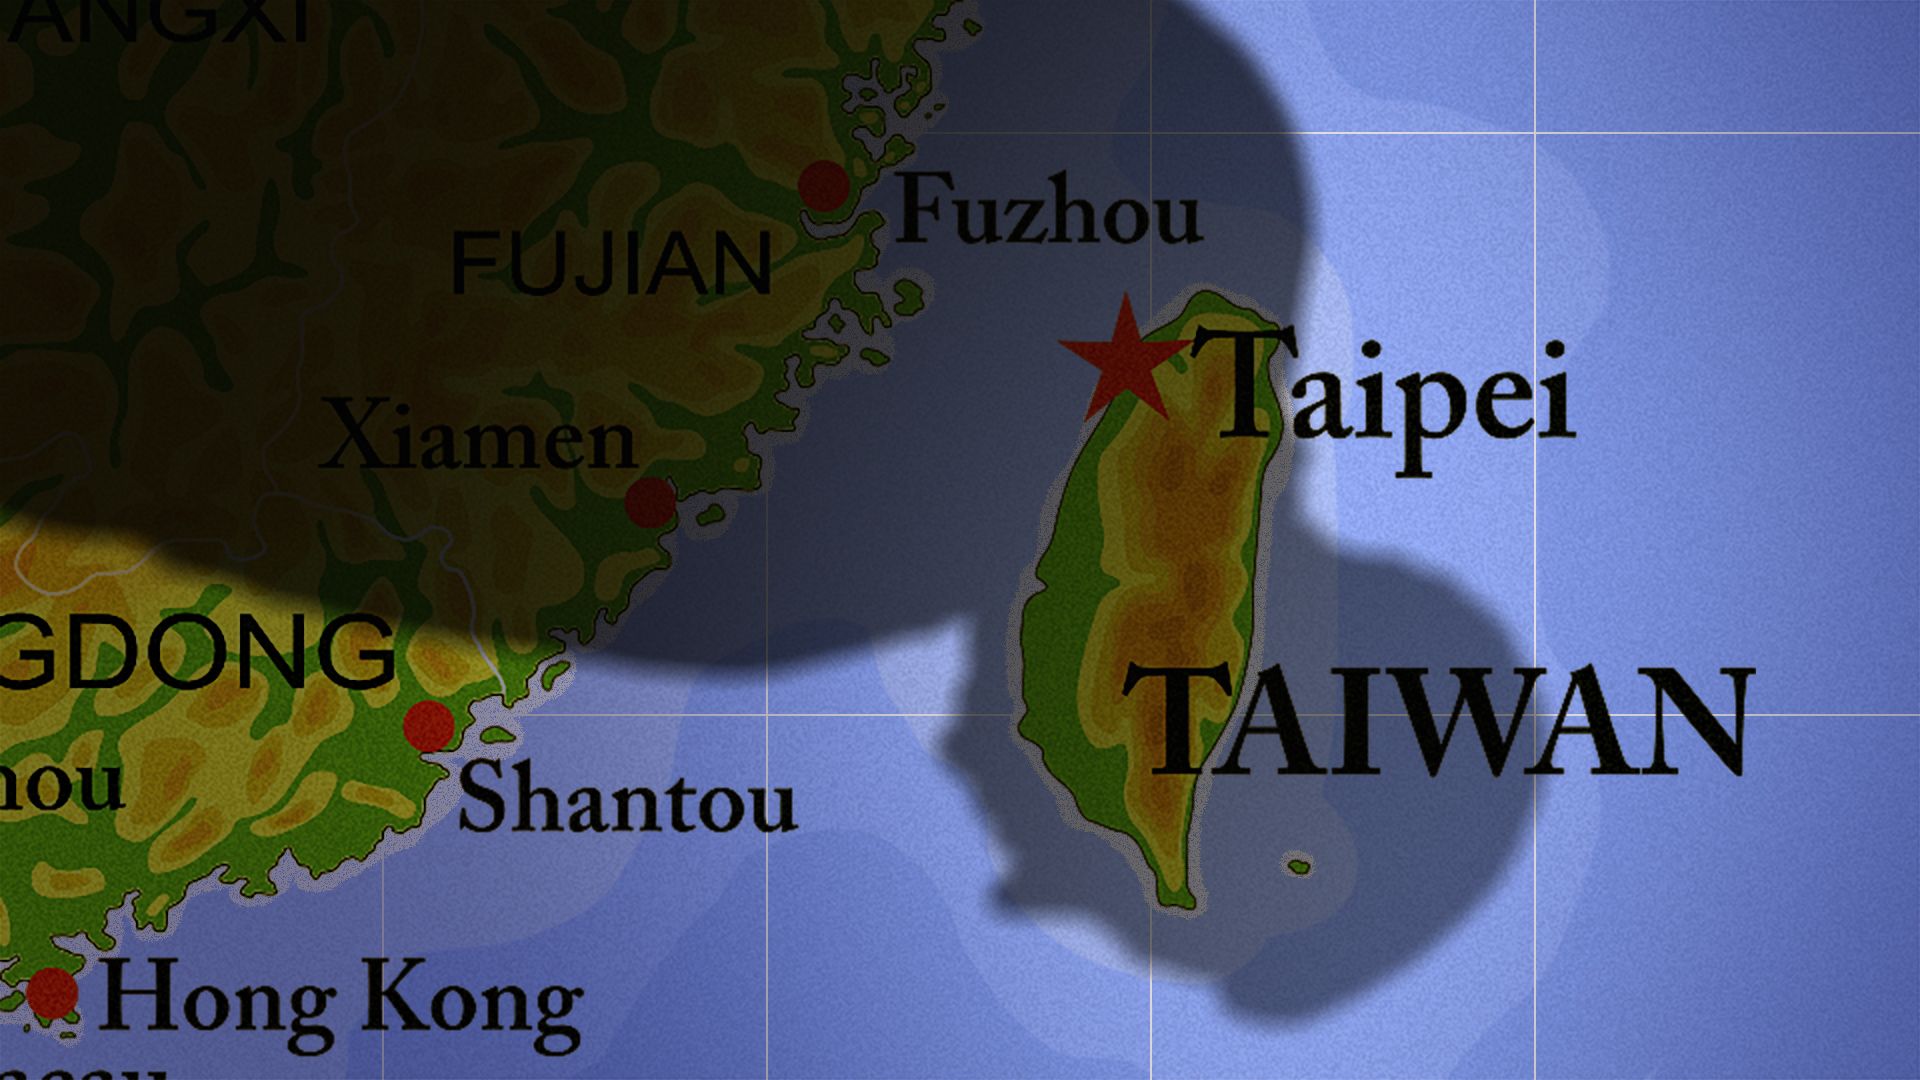 Illustration of a map of the coast of China and Taiwan, with a giant shadow of Xi Jinping looming over it.